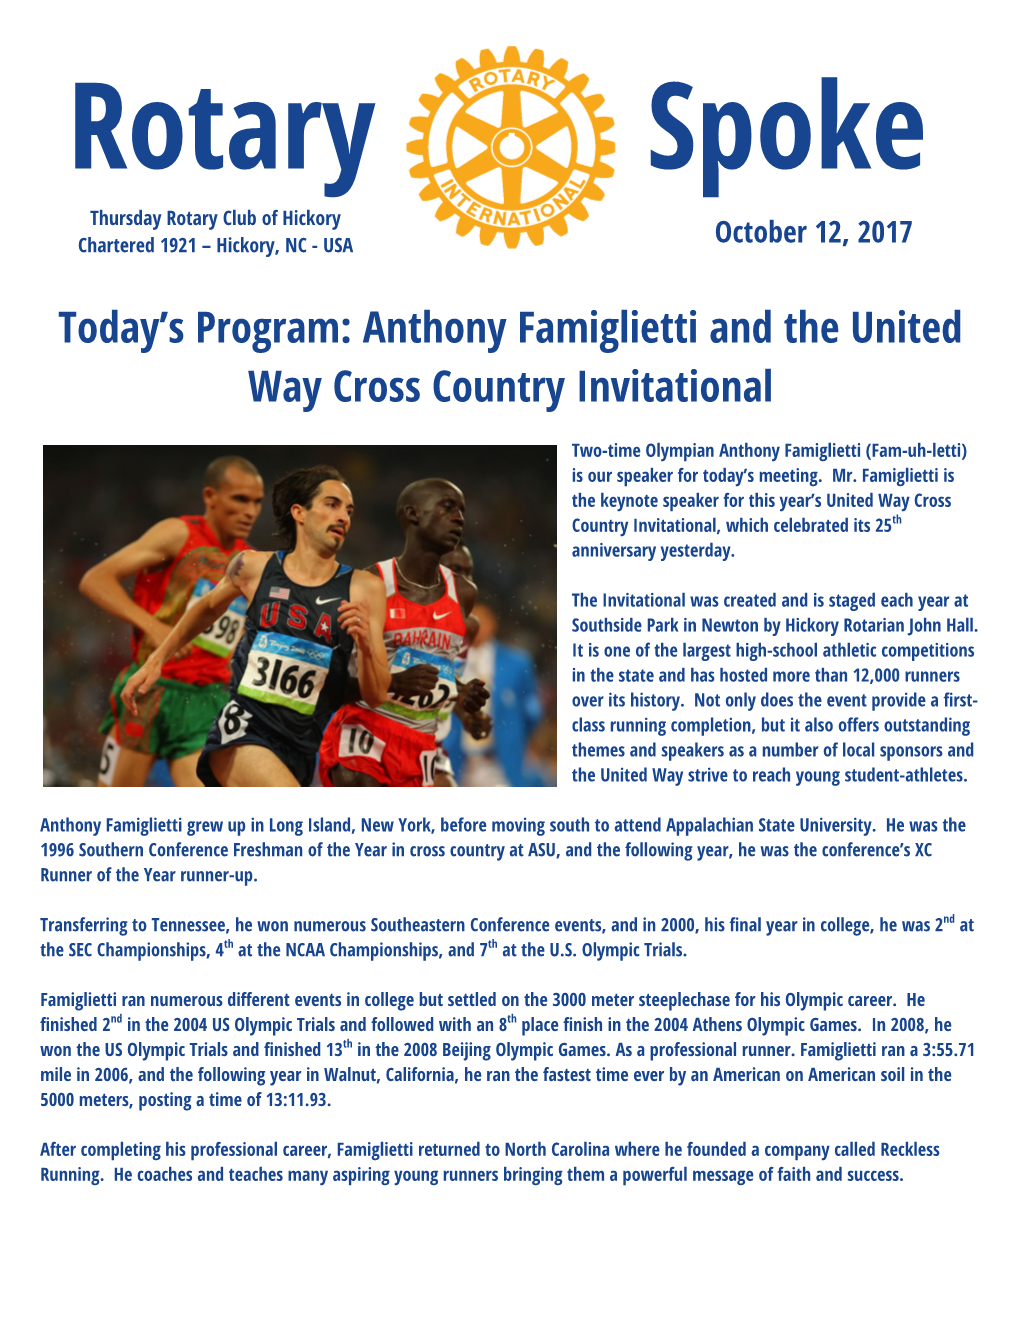 Today's Program: Anthony Famiglietti and the United Way Cross Country